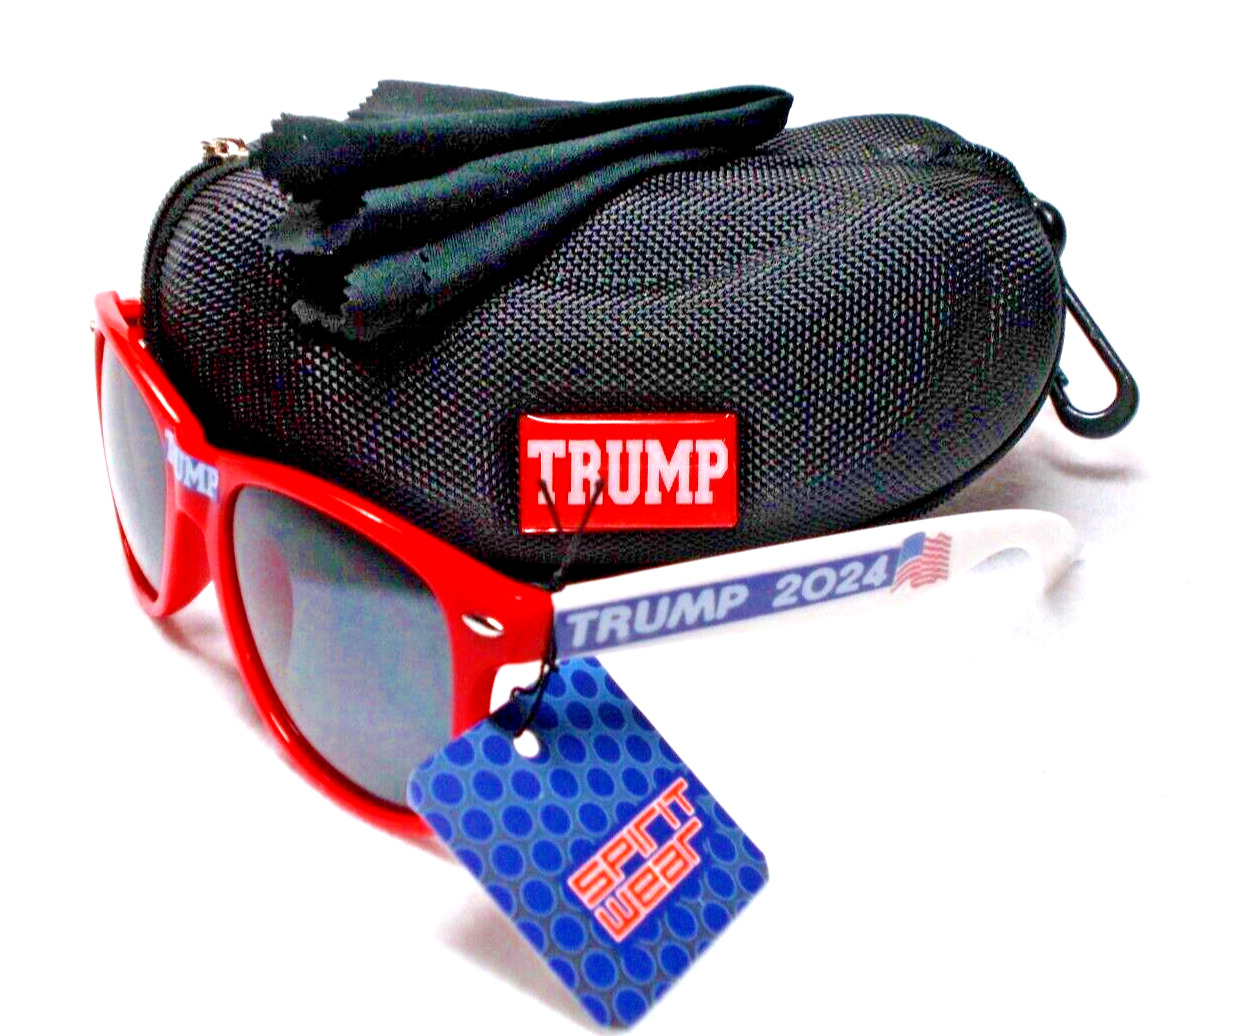 3 piece collector setTrump,MAGA,FJB. Sunglasses/Case/Cleaning clothSee Details